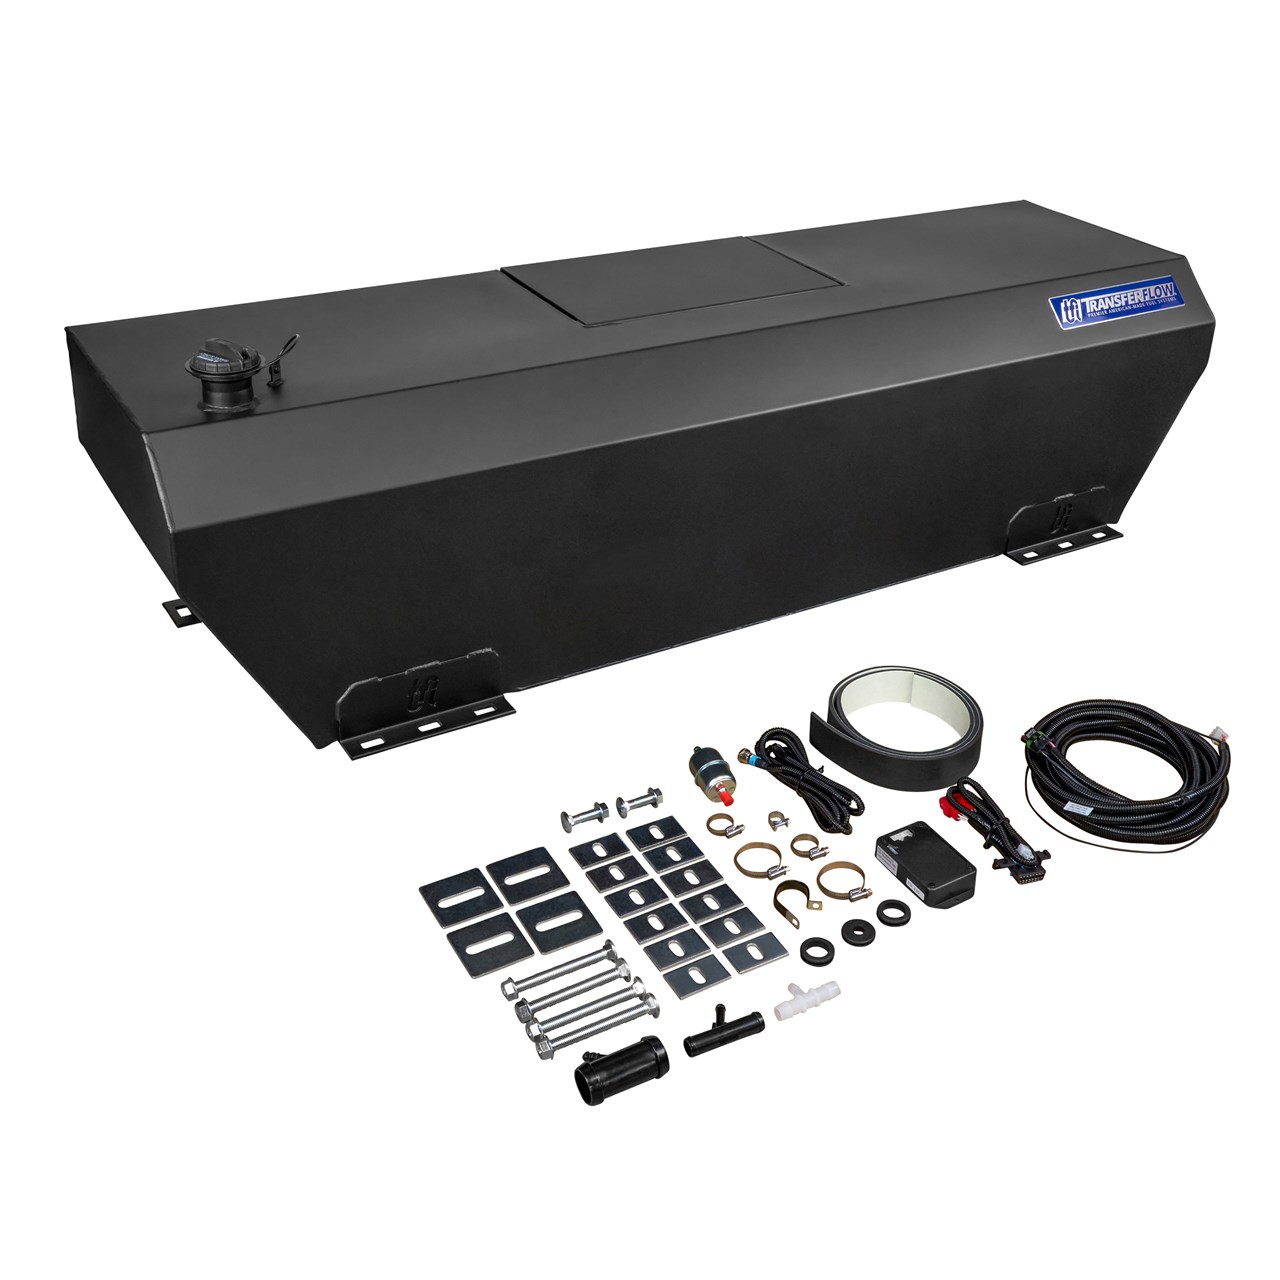 Fuel For The Road: Titan Fuel Tanks' In-Bed Transfer Tank Toolbox